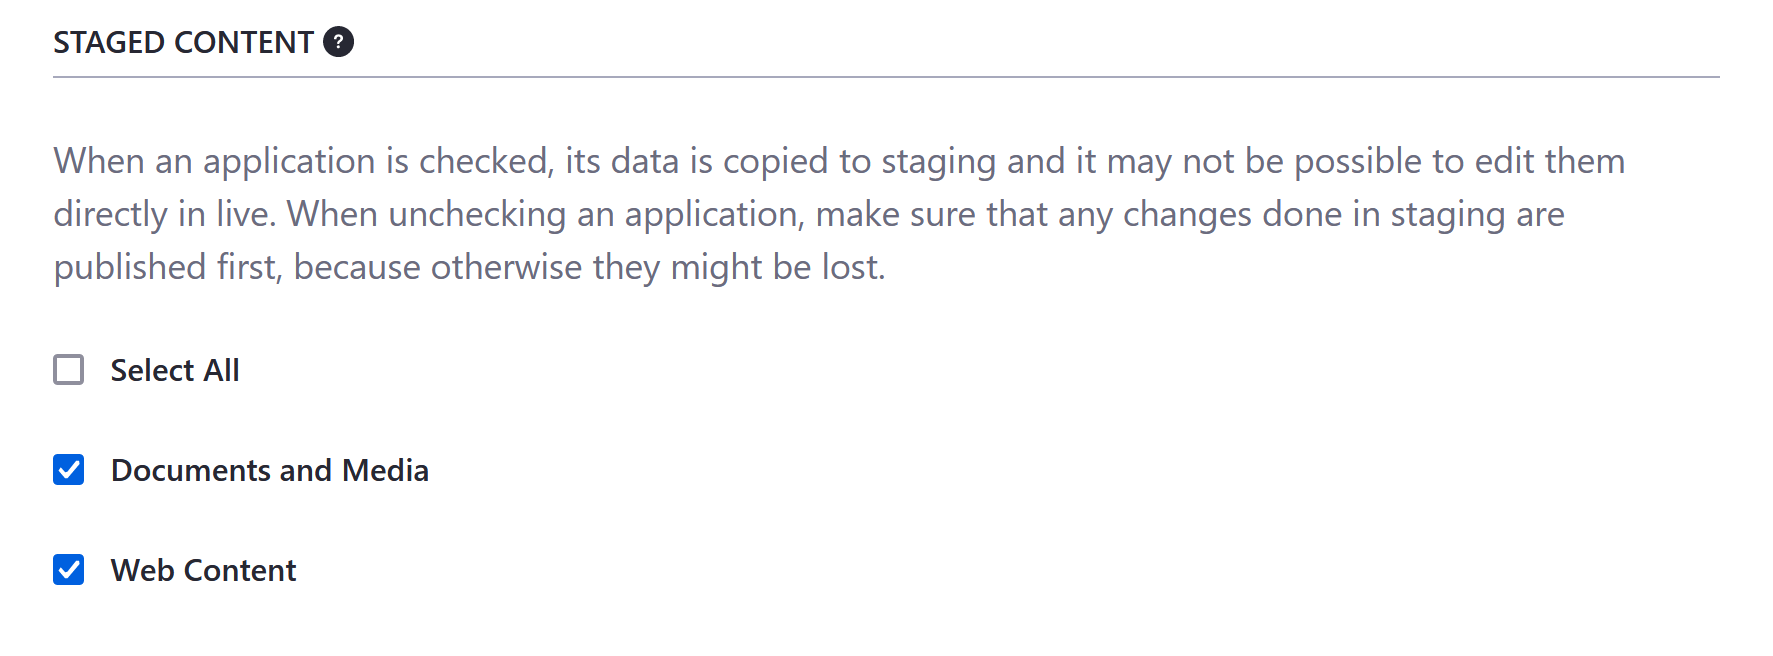 Select the application data you want to stage.